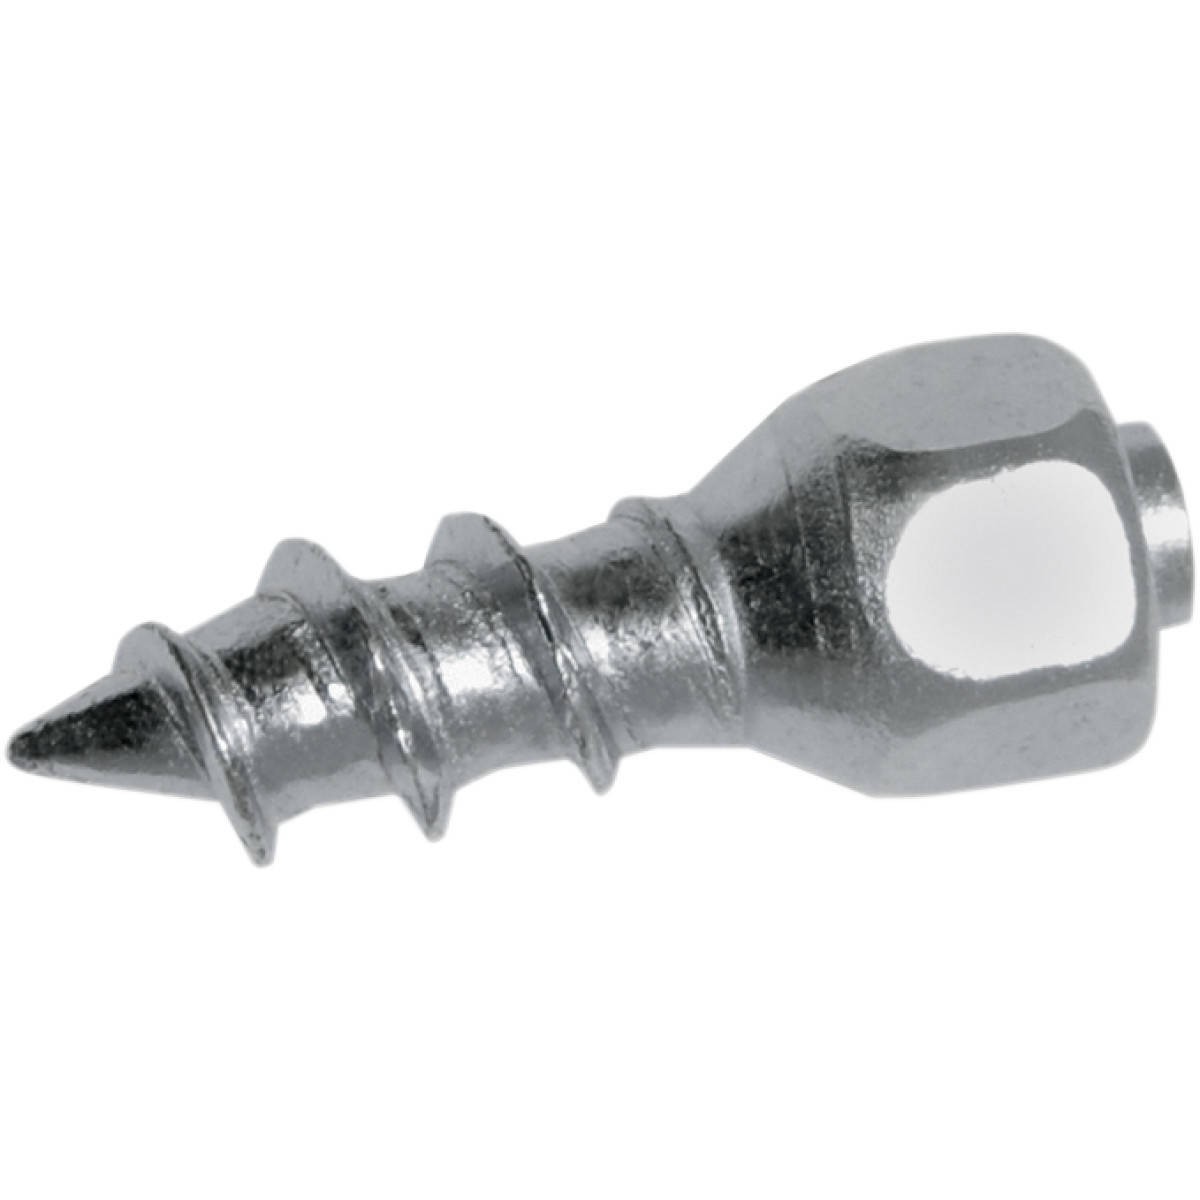 Woodys Twist Attack Tire Screws Outils Pour Pneus Accessoires Pour Pneus Accessoires Vtt 1104